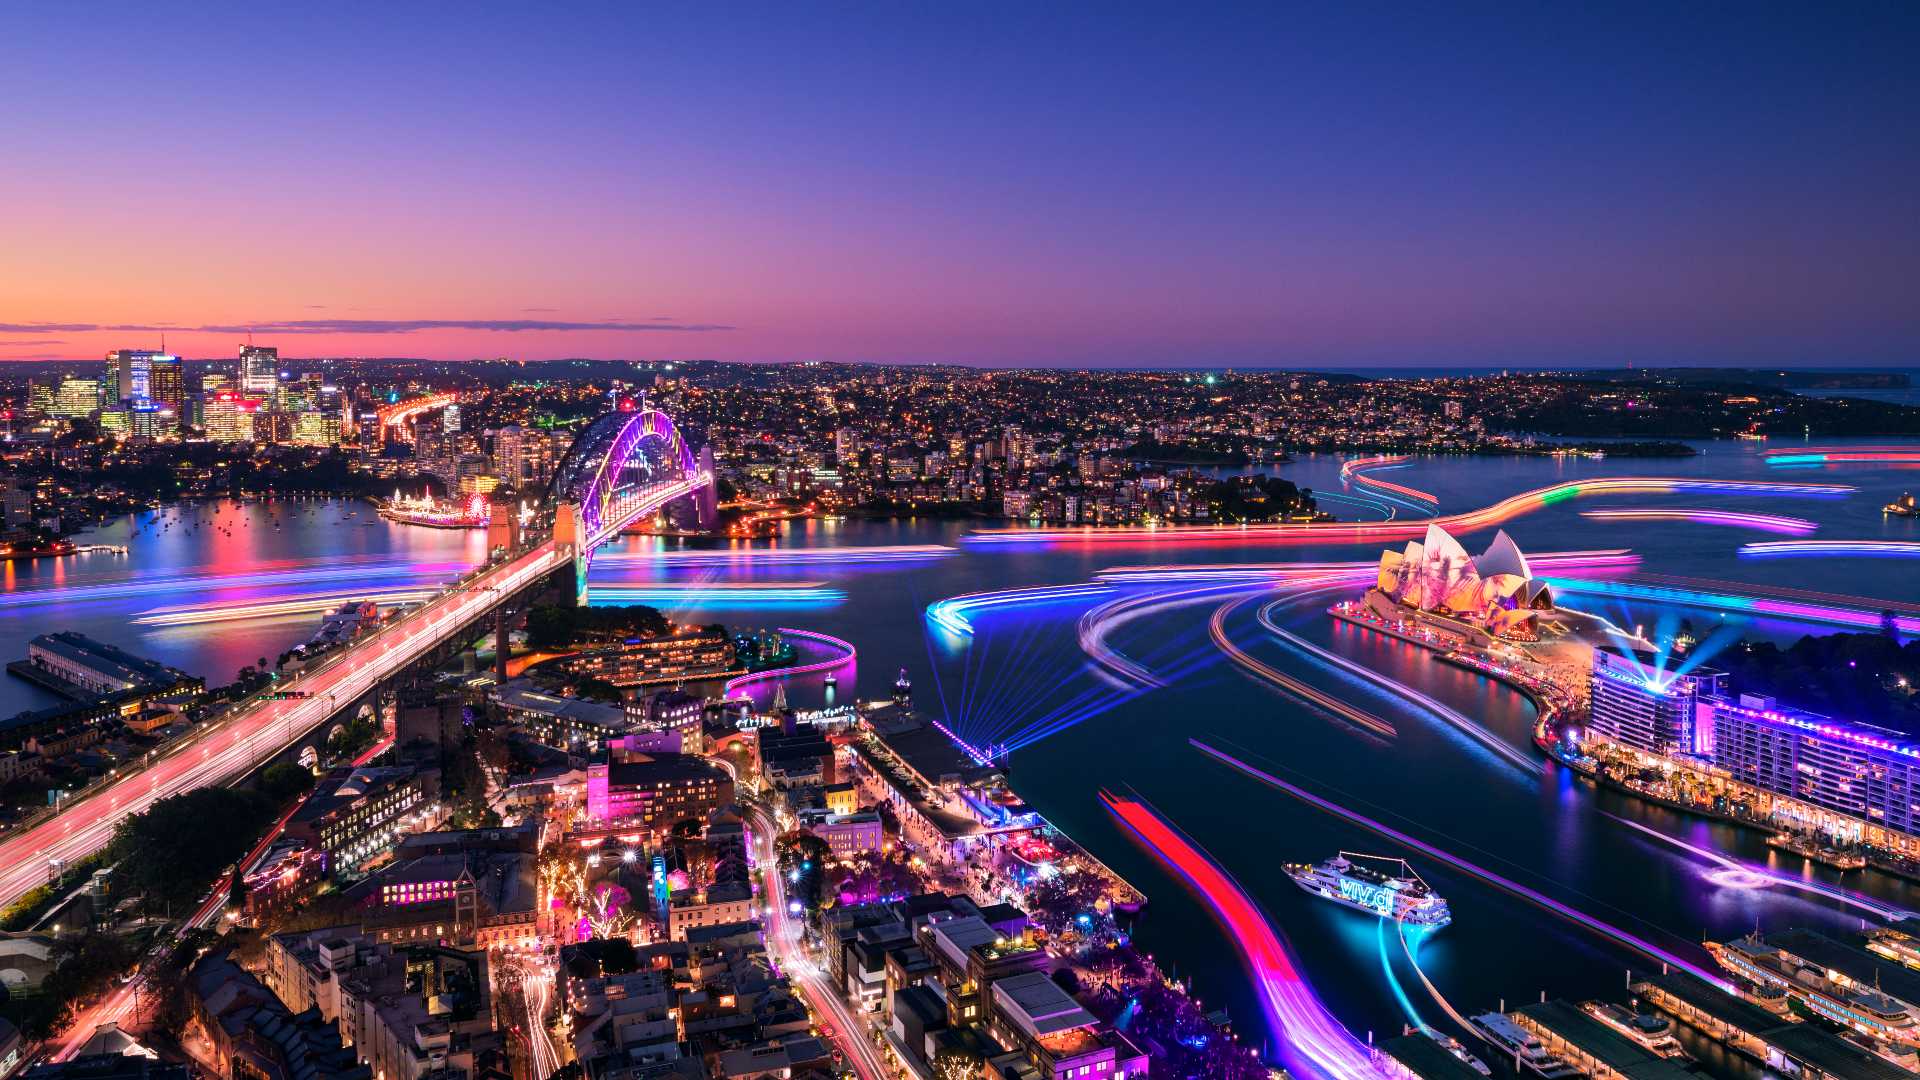 Eight Vivid Sydney Highlights to Add to Your Diary If You Want to Farewell Winter with a Bang